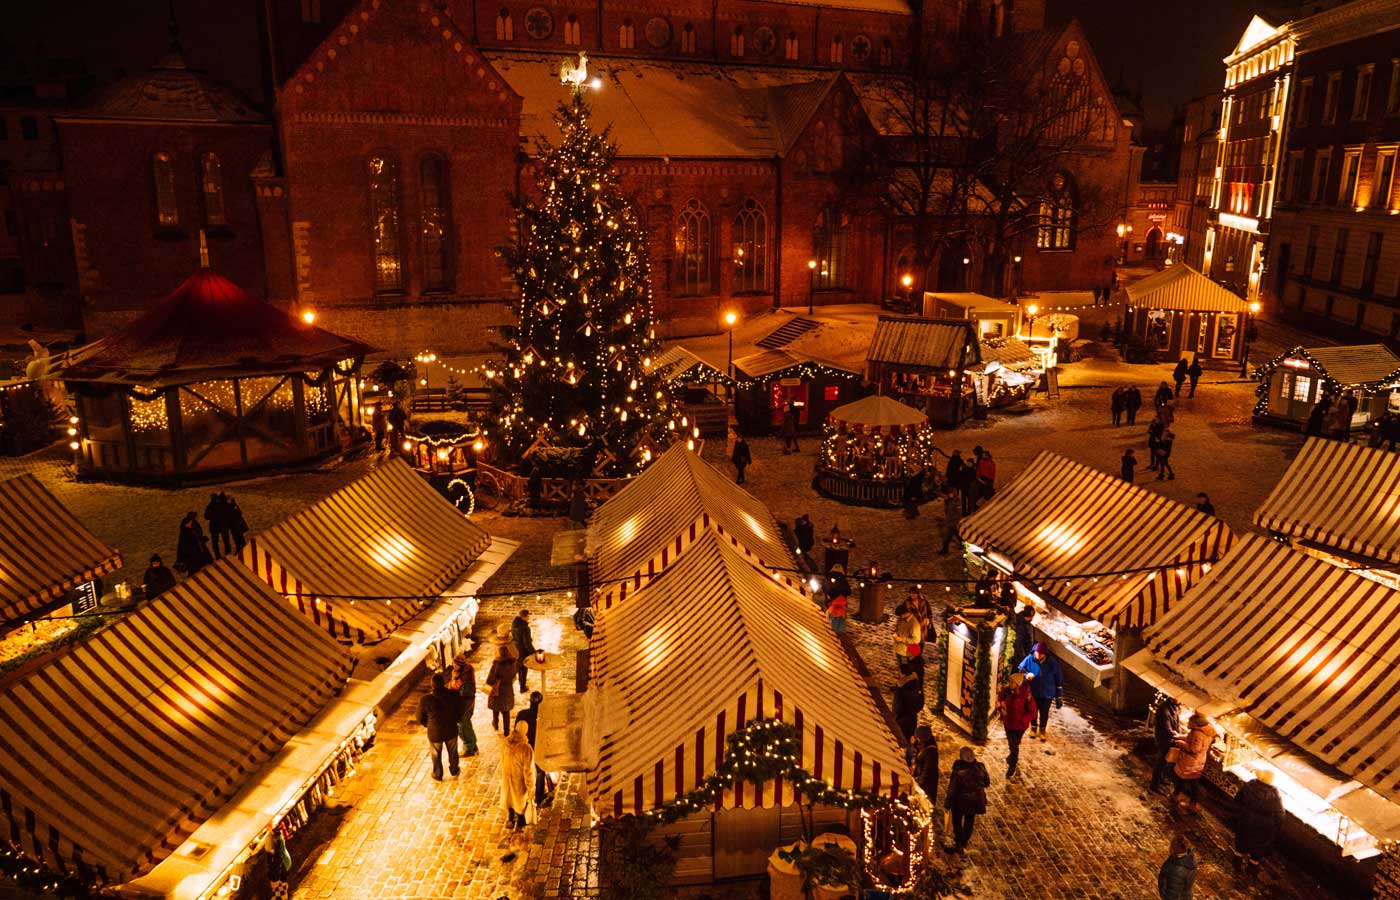 Christmas market stall ideas - Shows a market lit up at night